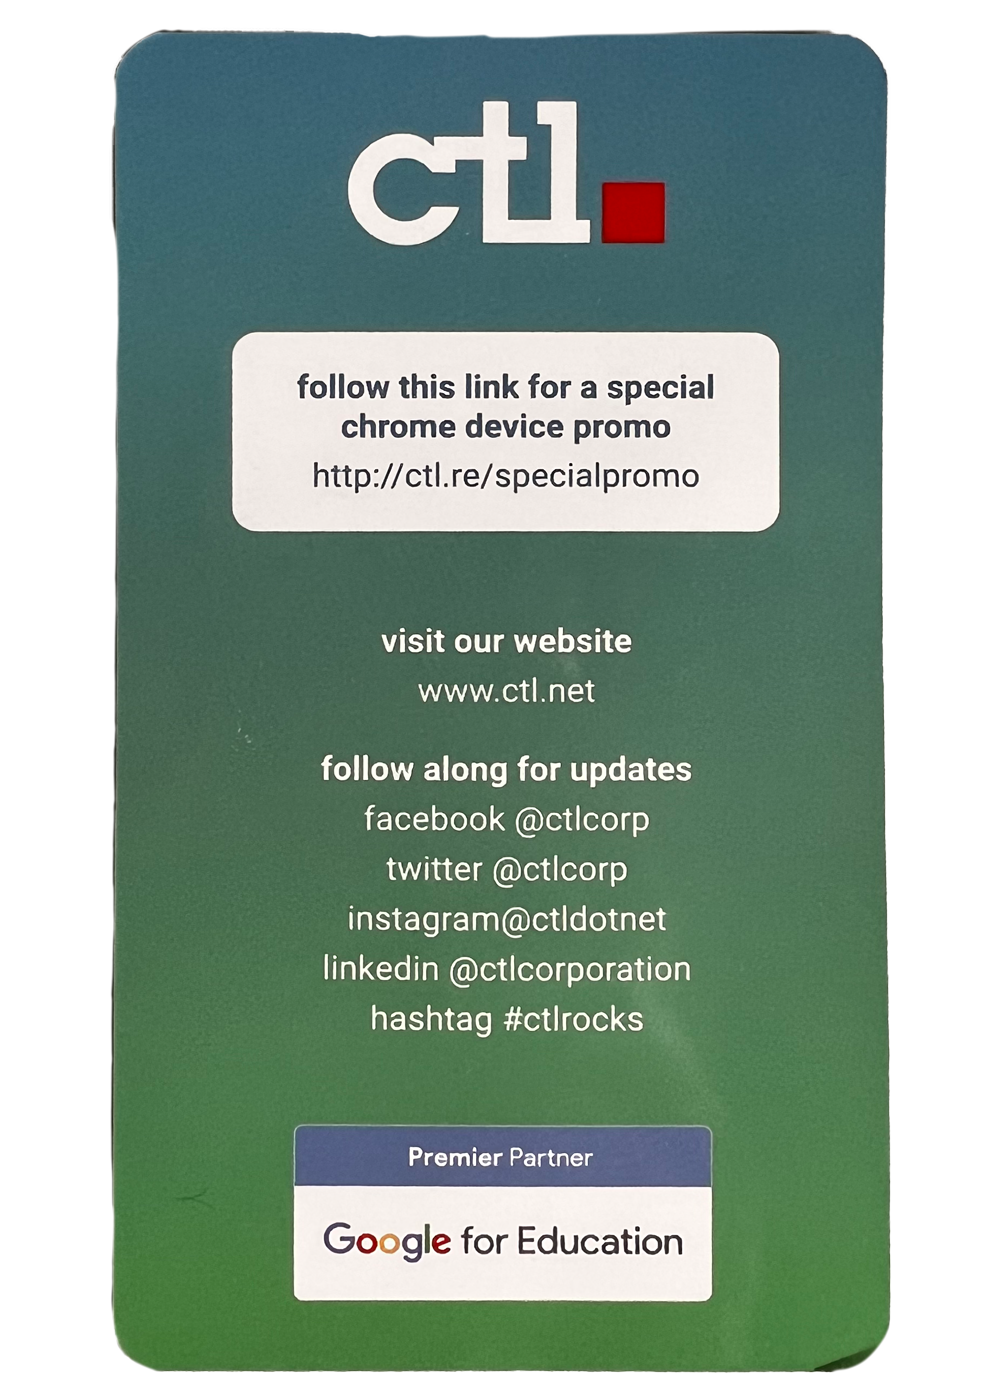 Twitter - LivePerson Knowledge Center